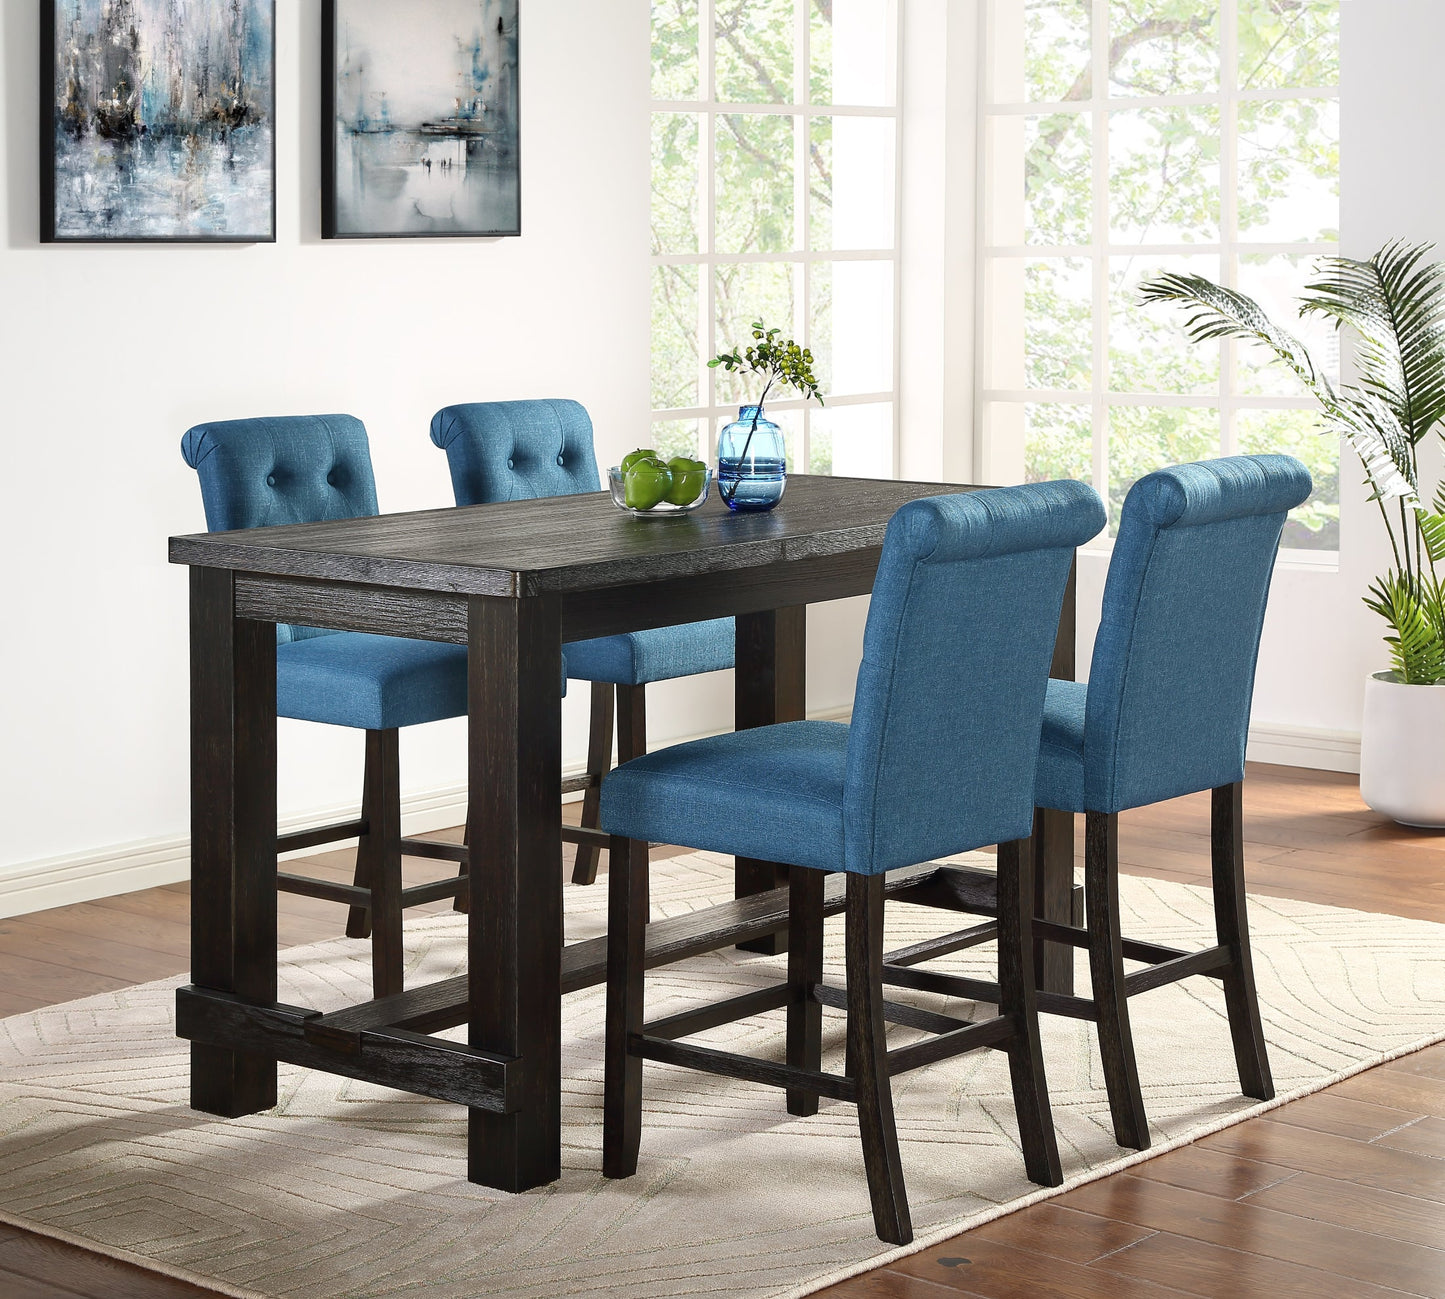 Leviton Antique Black Finished Wood 5-Piece Counter Height Dining Set, Blue